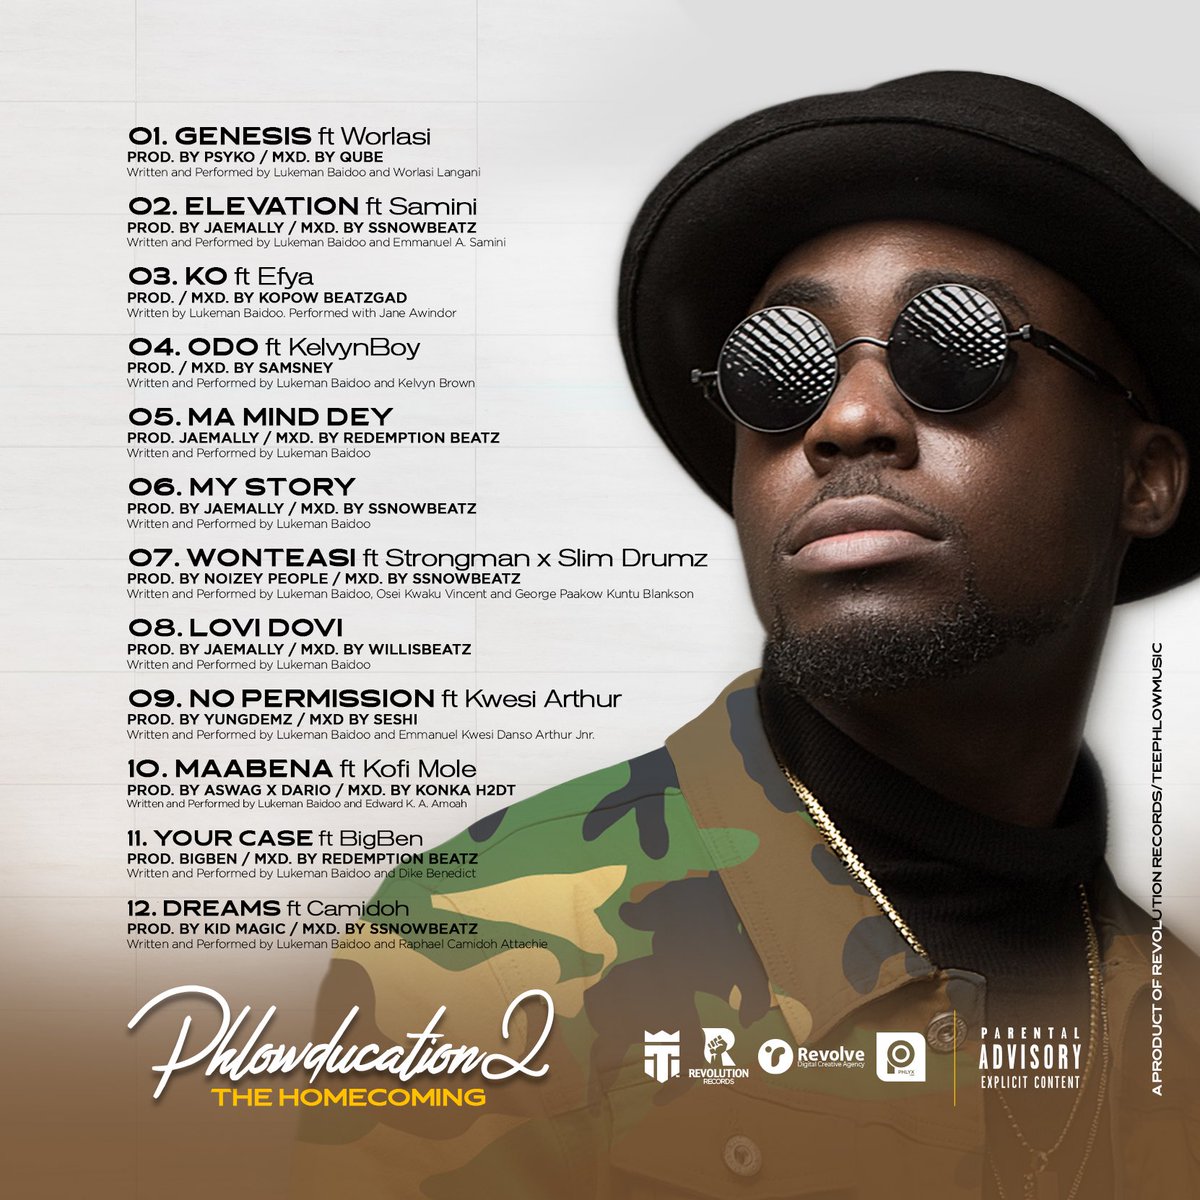 It’s almost here. @teephlowgh highly anticipated album ‘Phlowducation II’ drops in 2 days. Big shouts to everyone who supported, it’s been a journey and we couldn’t have done it without you. #PhlowducationII #TheHomeComing 
—
Artwork by @kakrabagh_